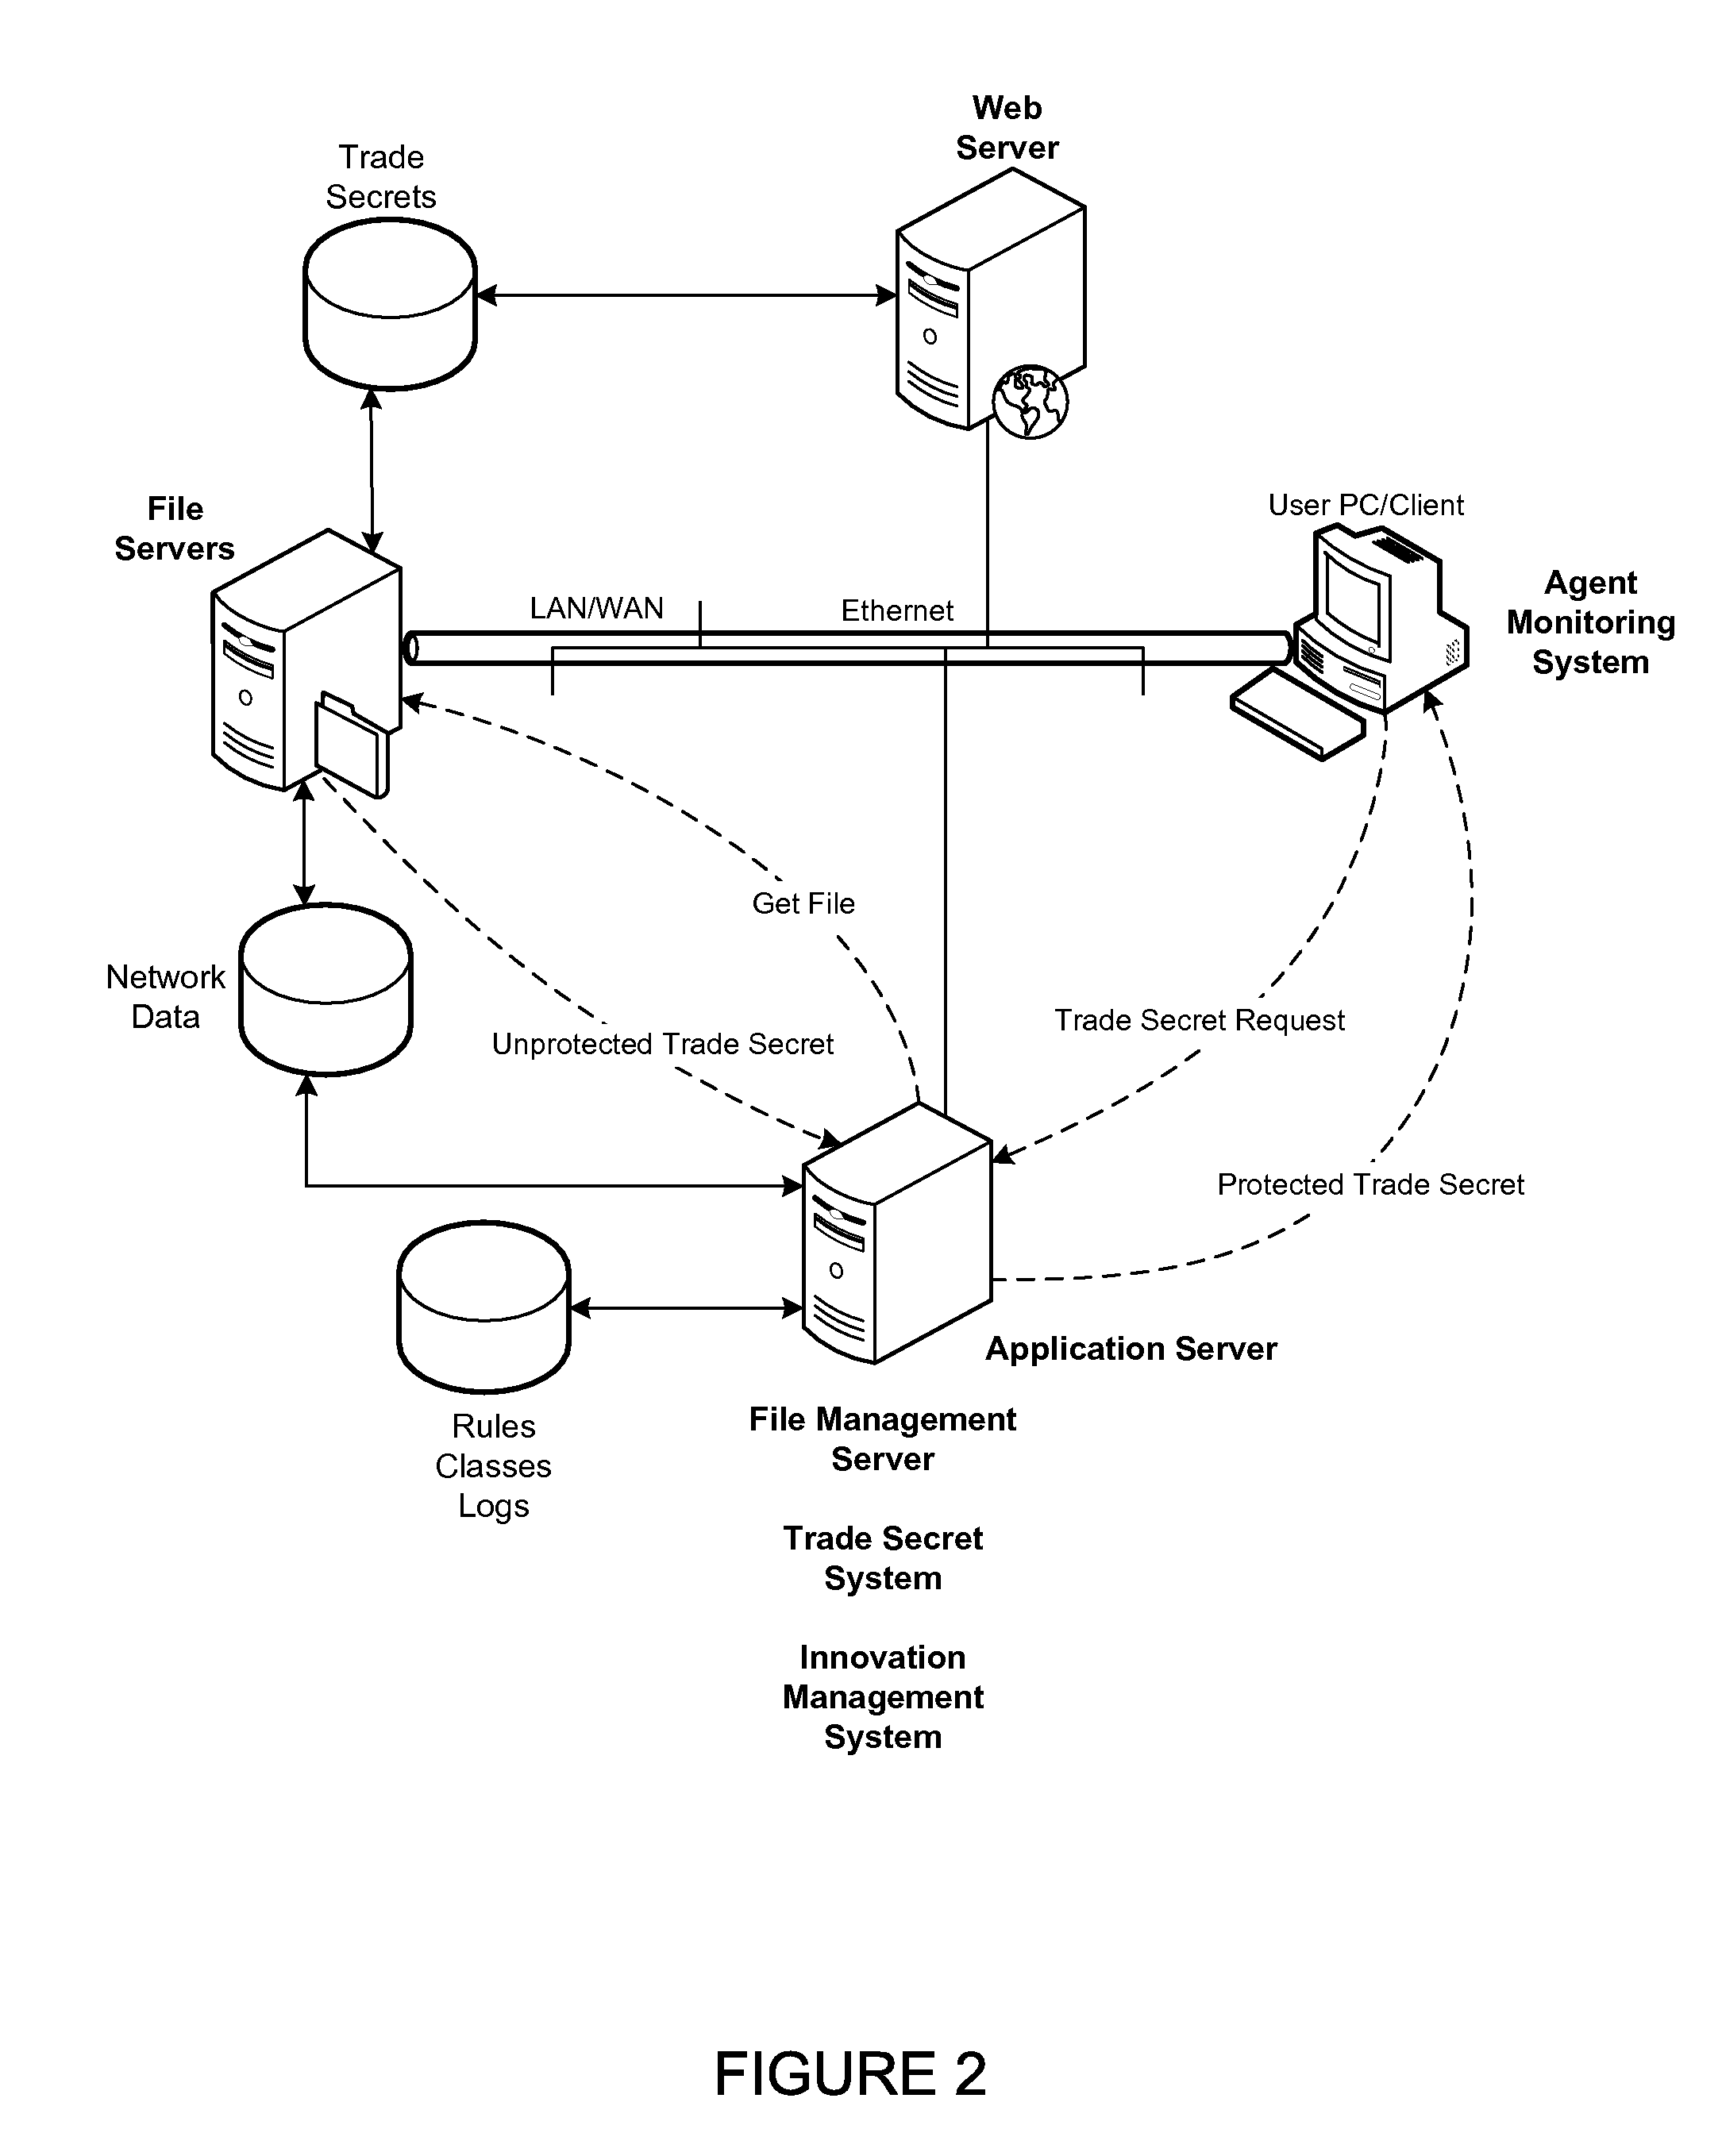 System for Automating and Managing an Enterprise IP Environment